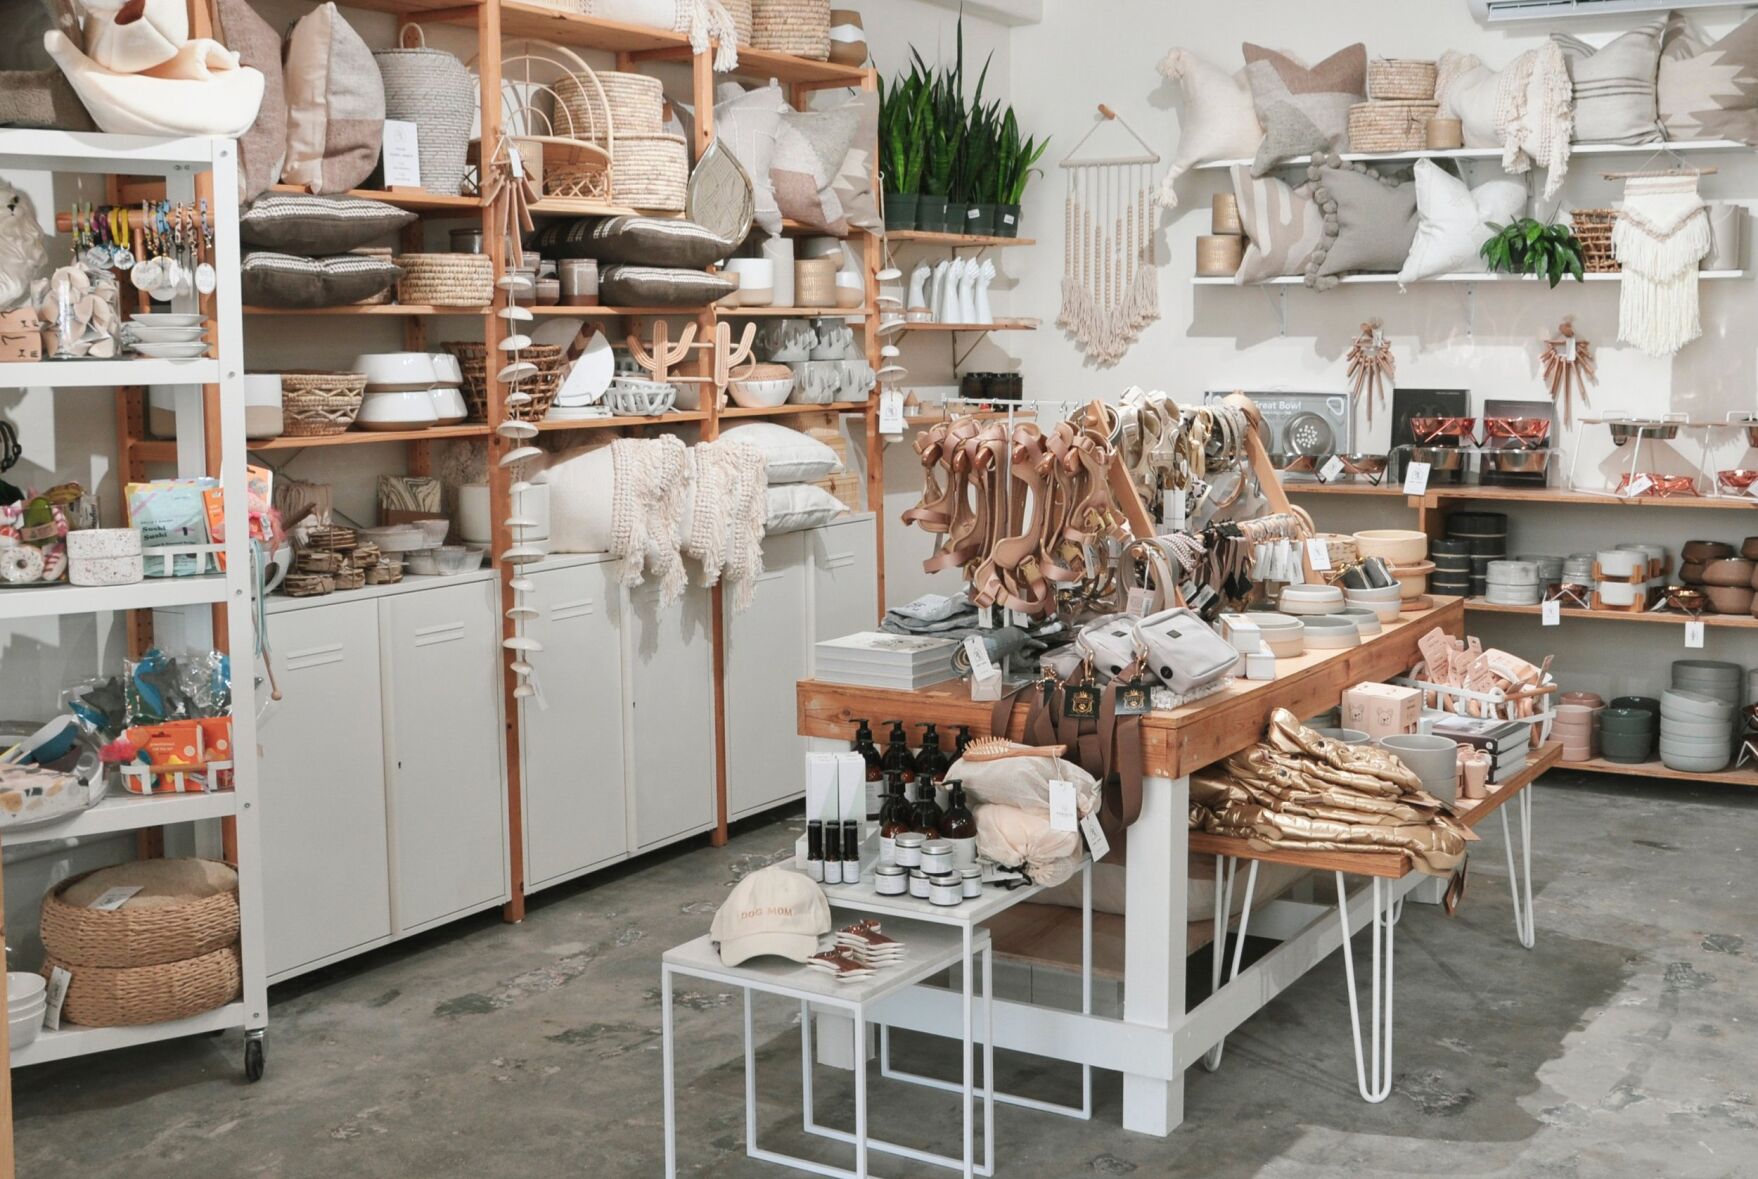 Our Essential Guide to Shopping Small in San Diego - San Diego